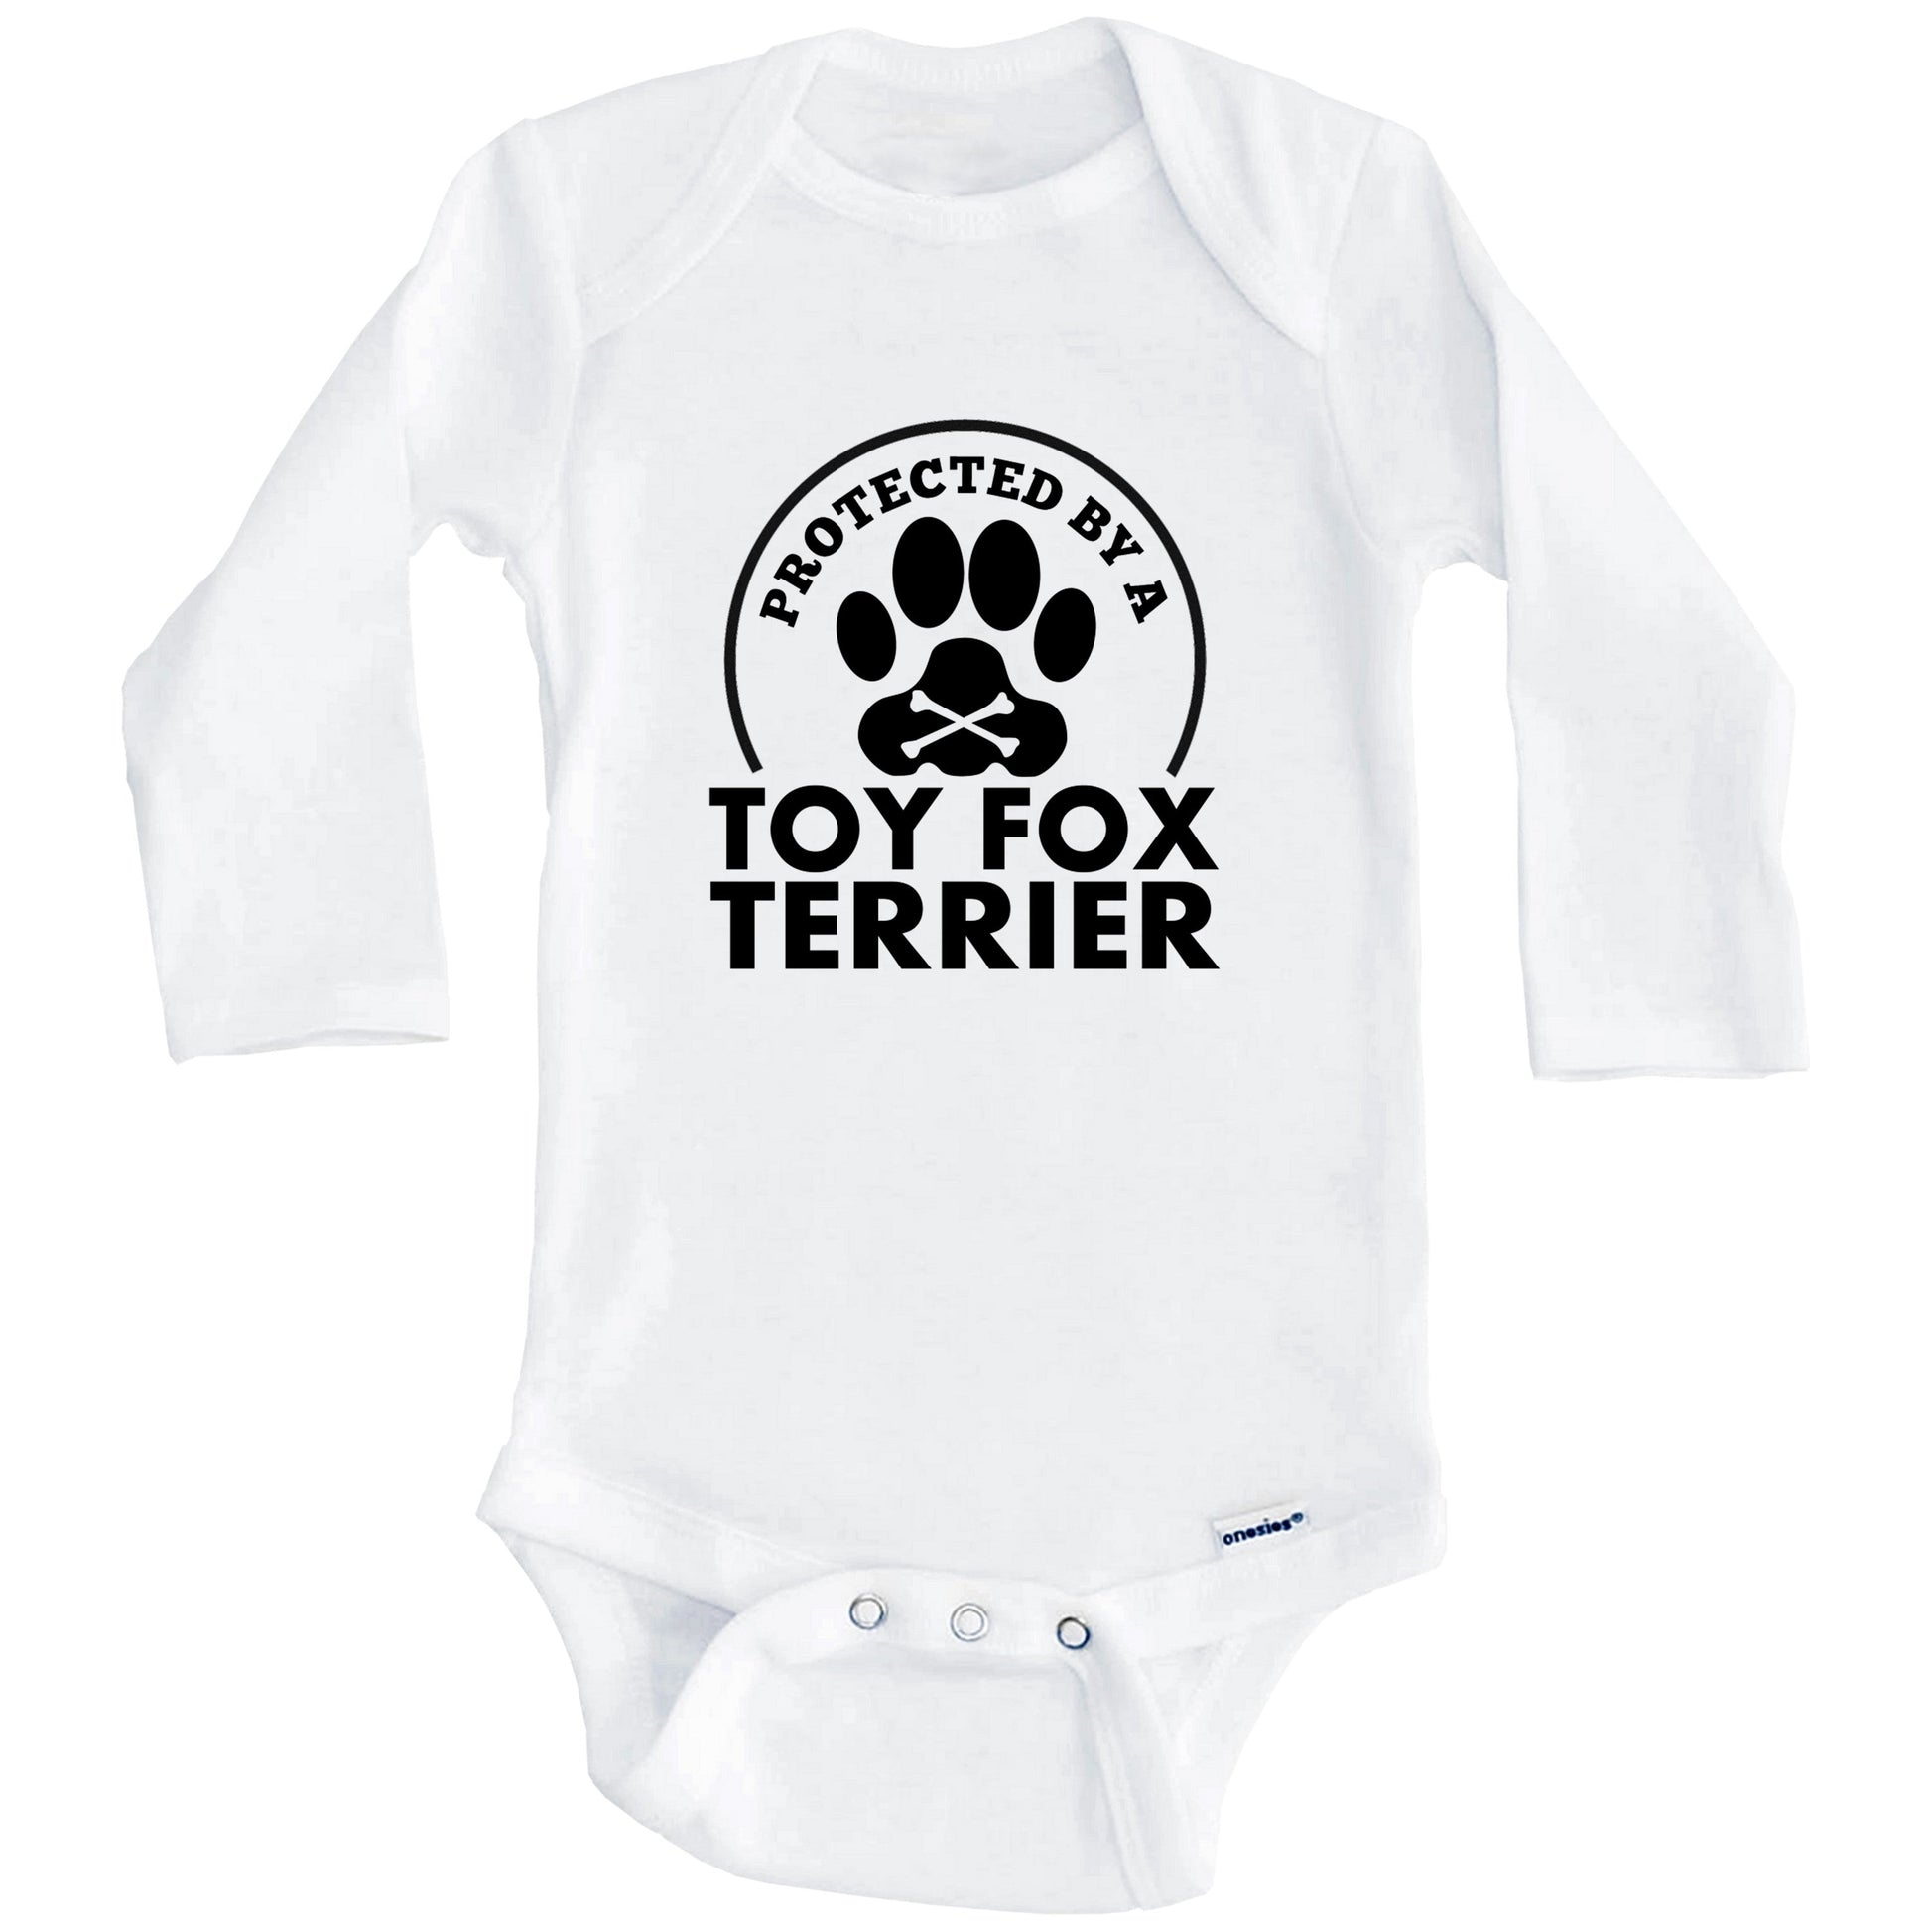 Protected By A Toy Fox Terrier Funny Baby Onesie (Long Sleeves)